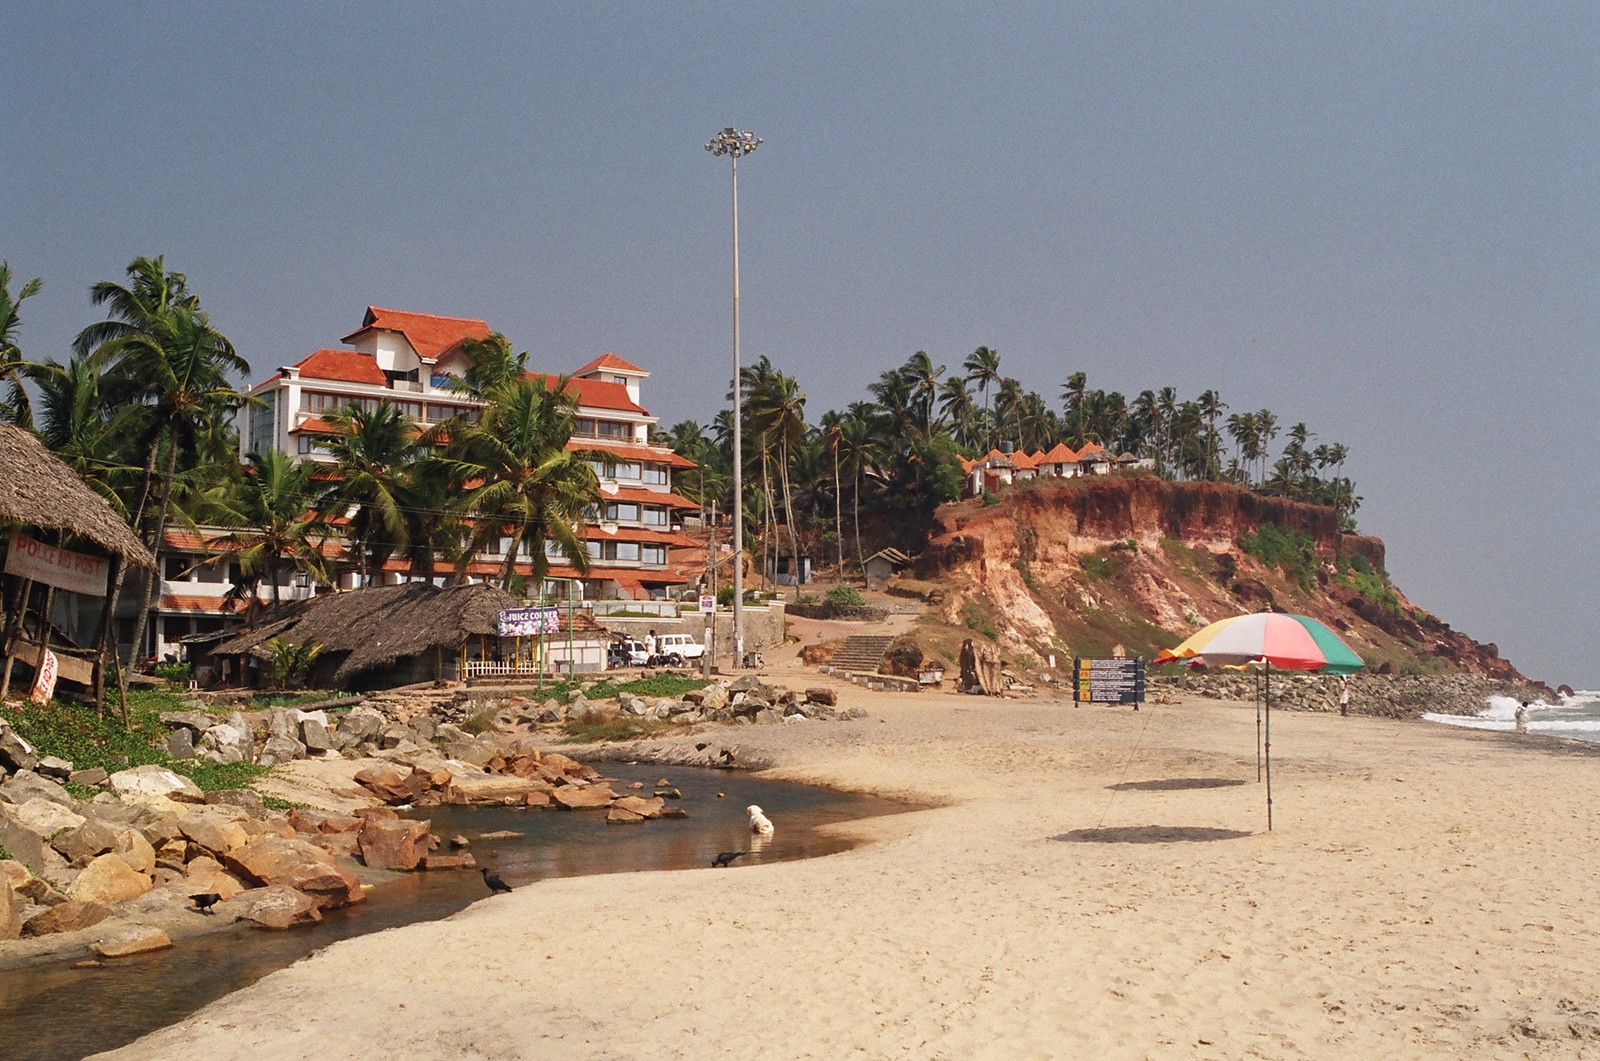 The southern end of the beach at Varkala